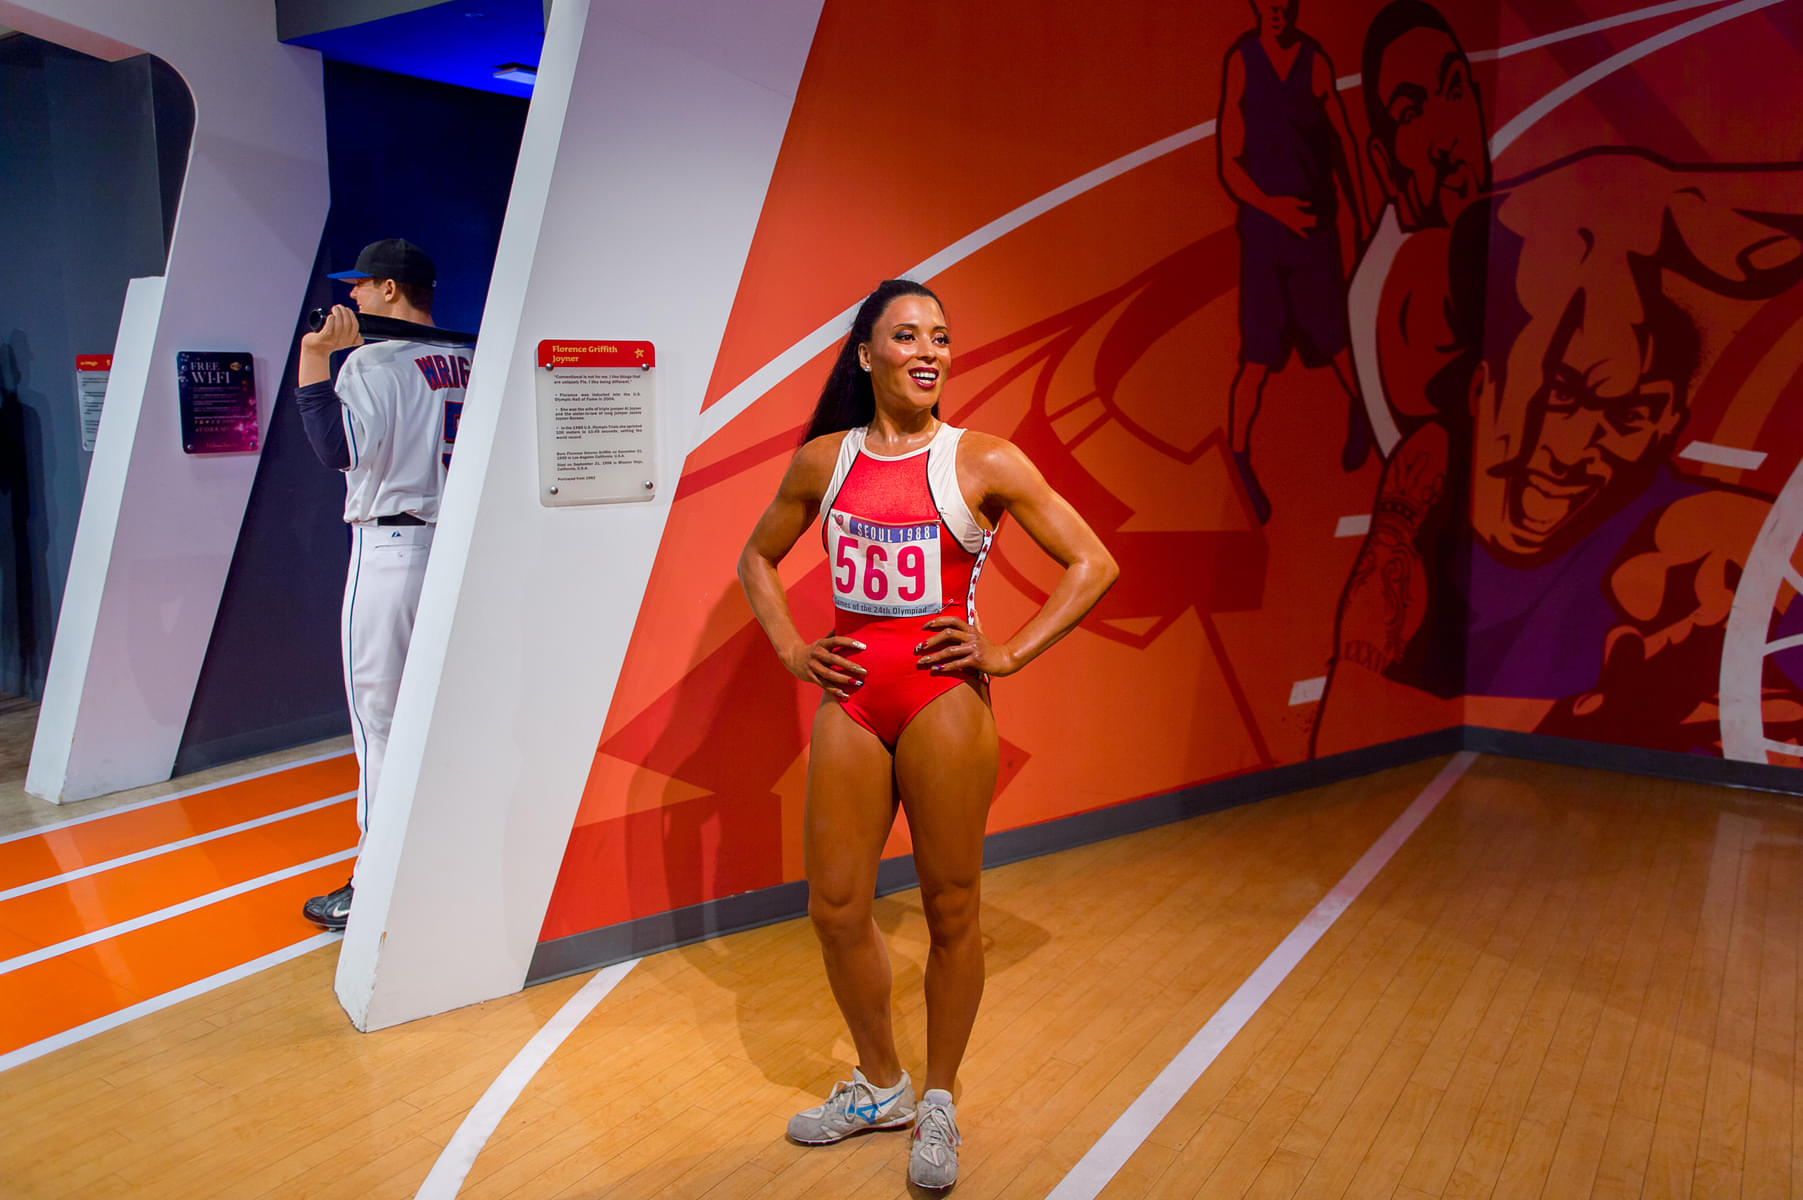 See various famous athletes as you stroll inside the museum